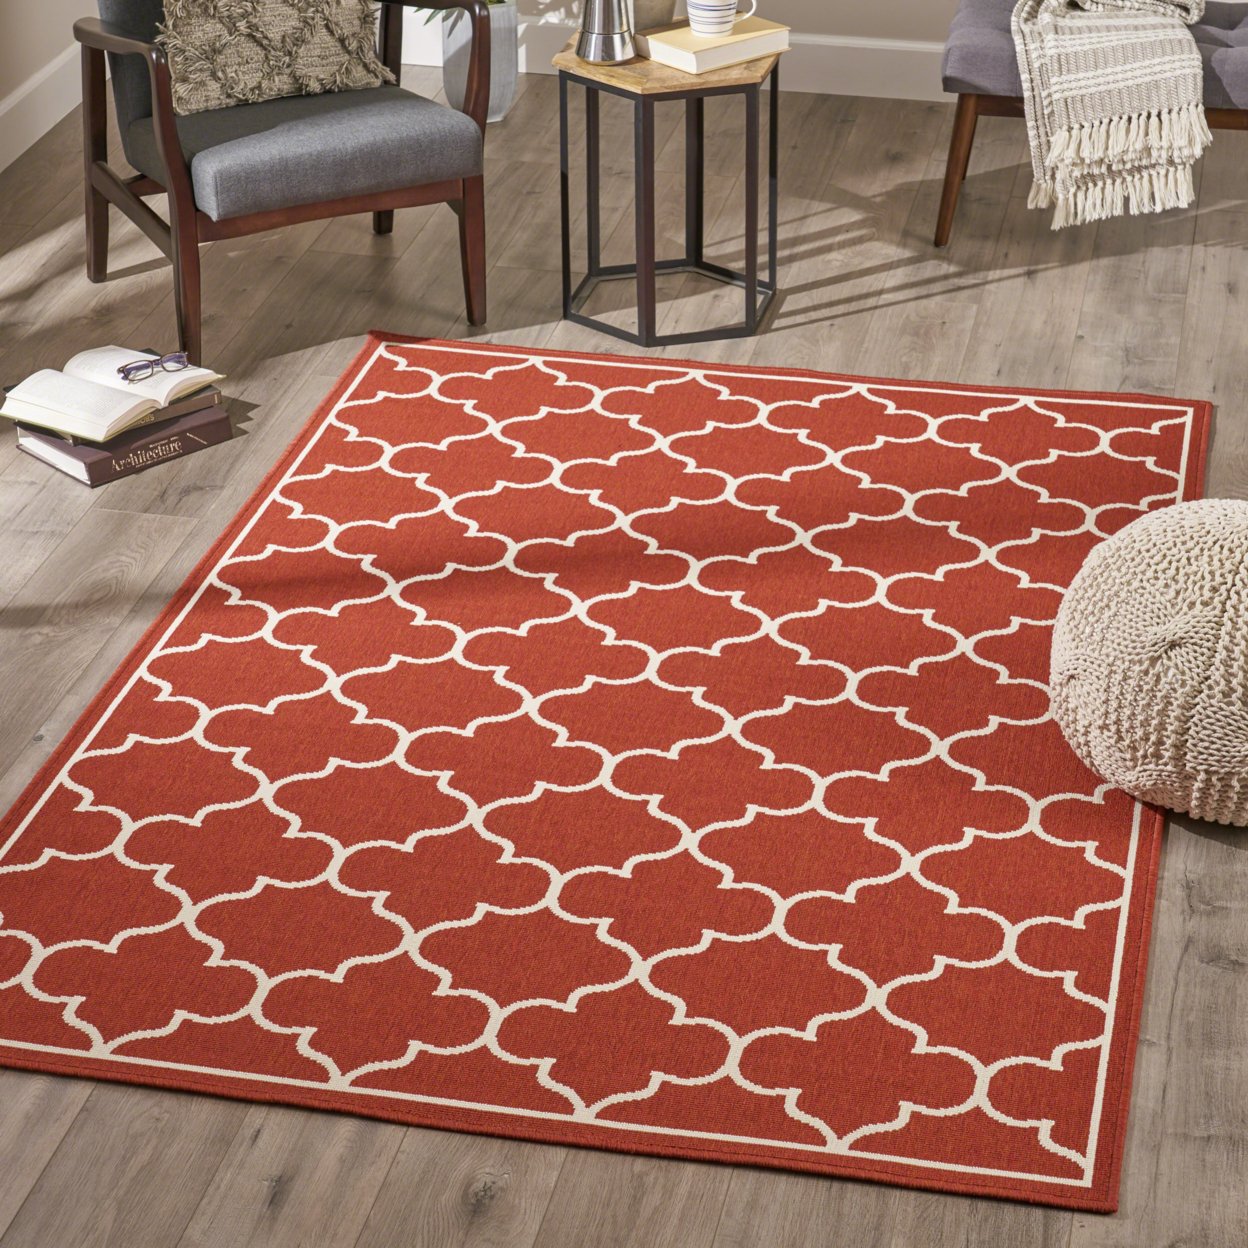 Marcy Indoor Geometric Area Rug, Red And Ivory - Red + Ivory, 8' X 11'